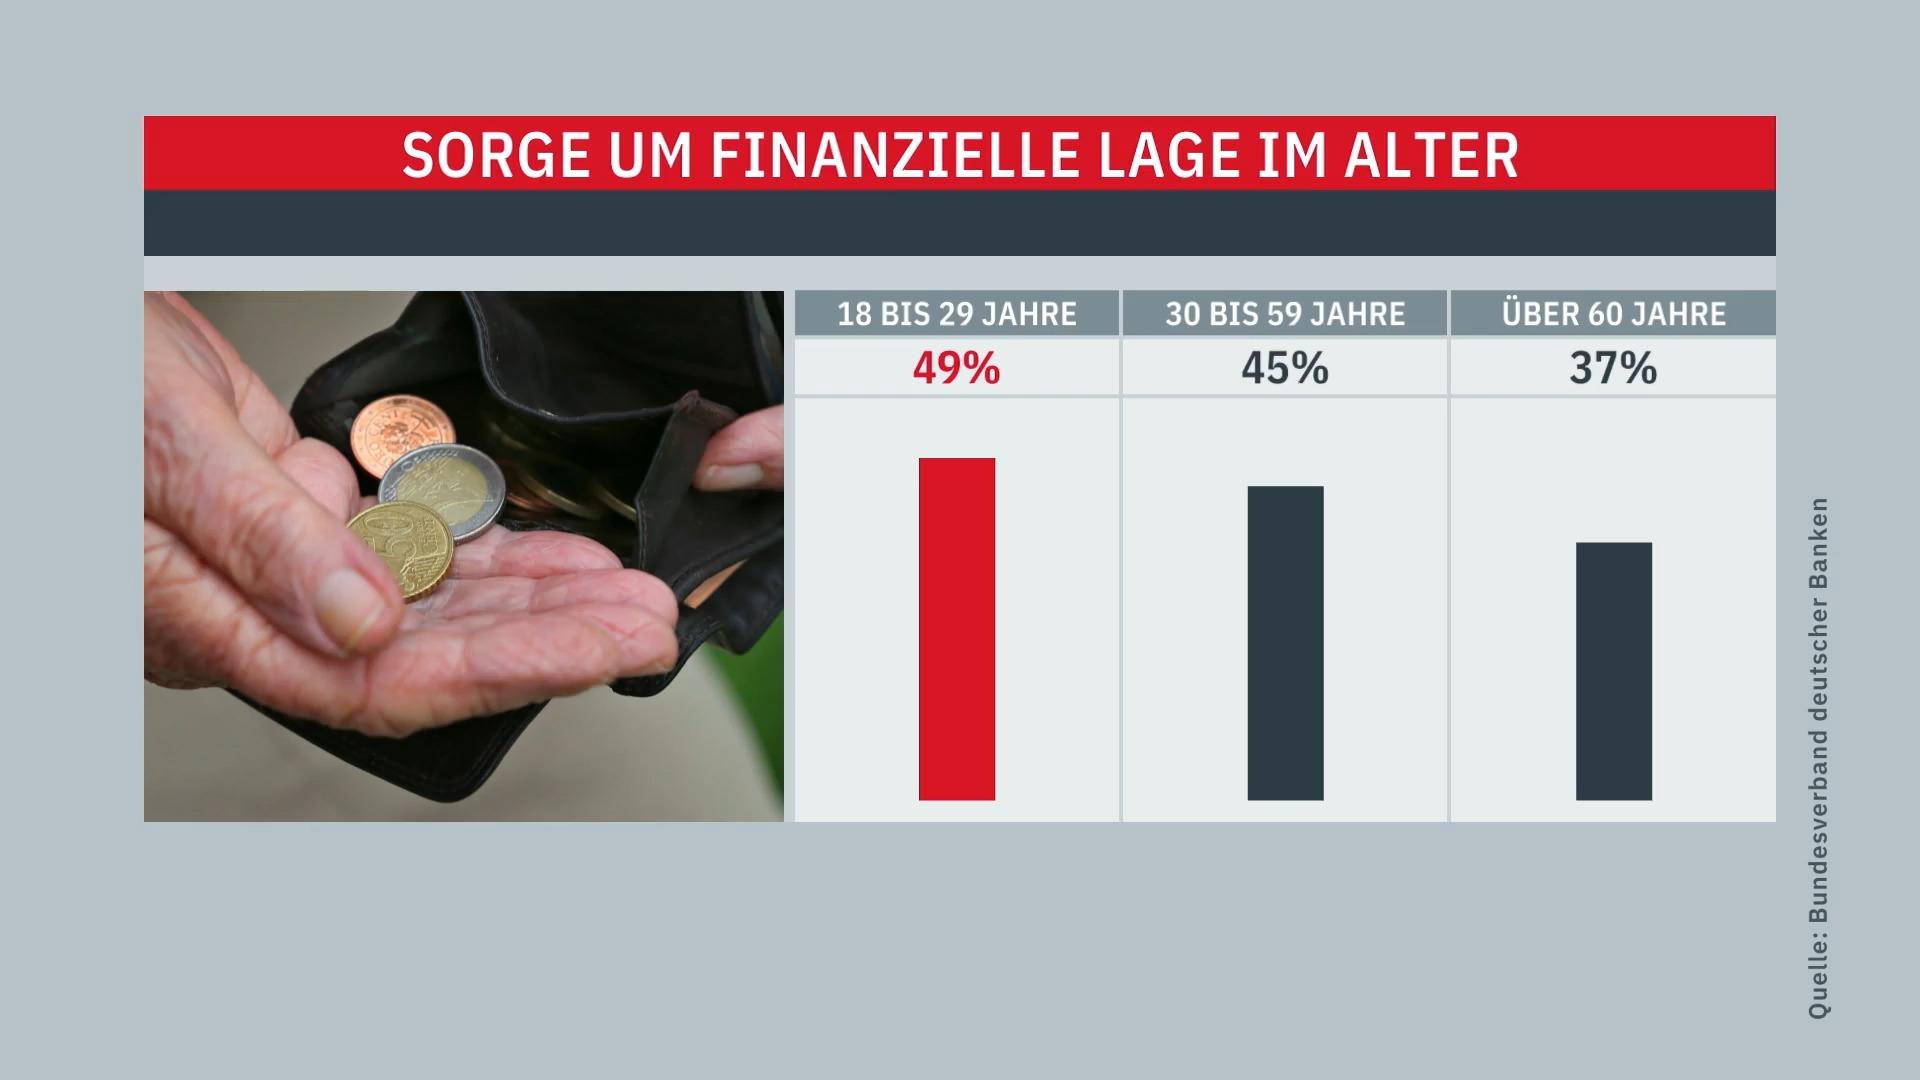 Germans worry about their financial situation in old age, survey by the Association of Banks